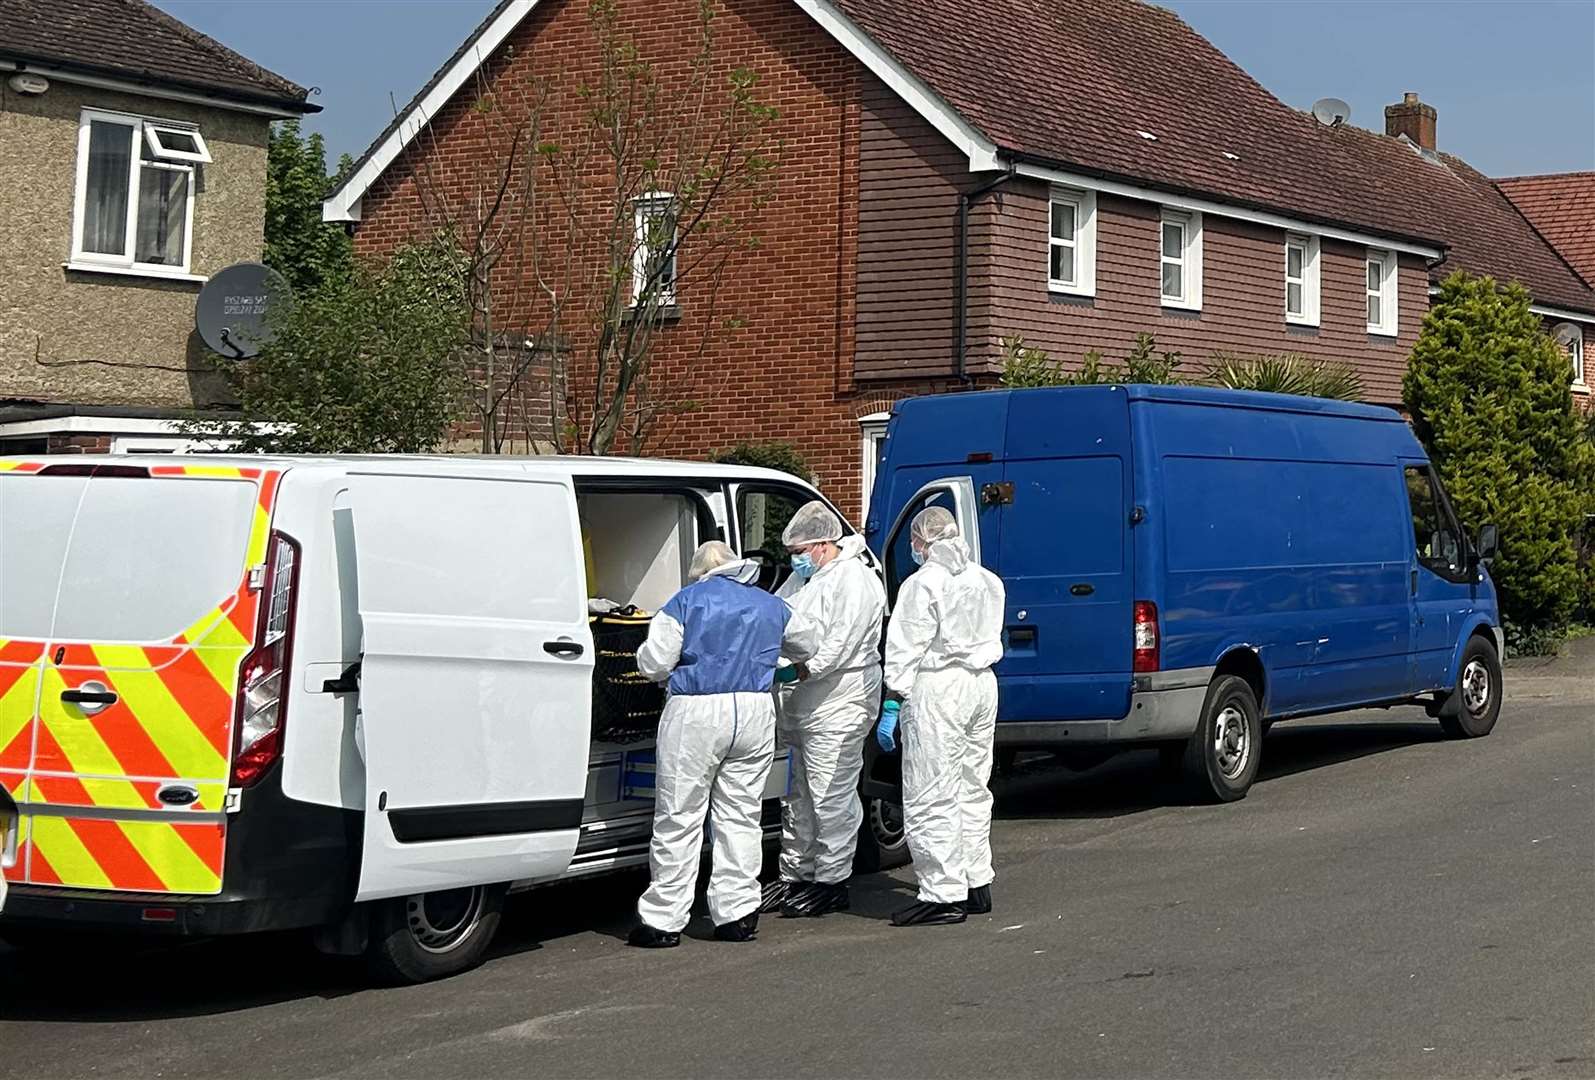 Forensic investigators at the scene in High Wycombe (Sam Hall/PA)